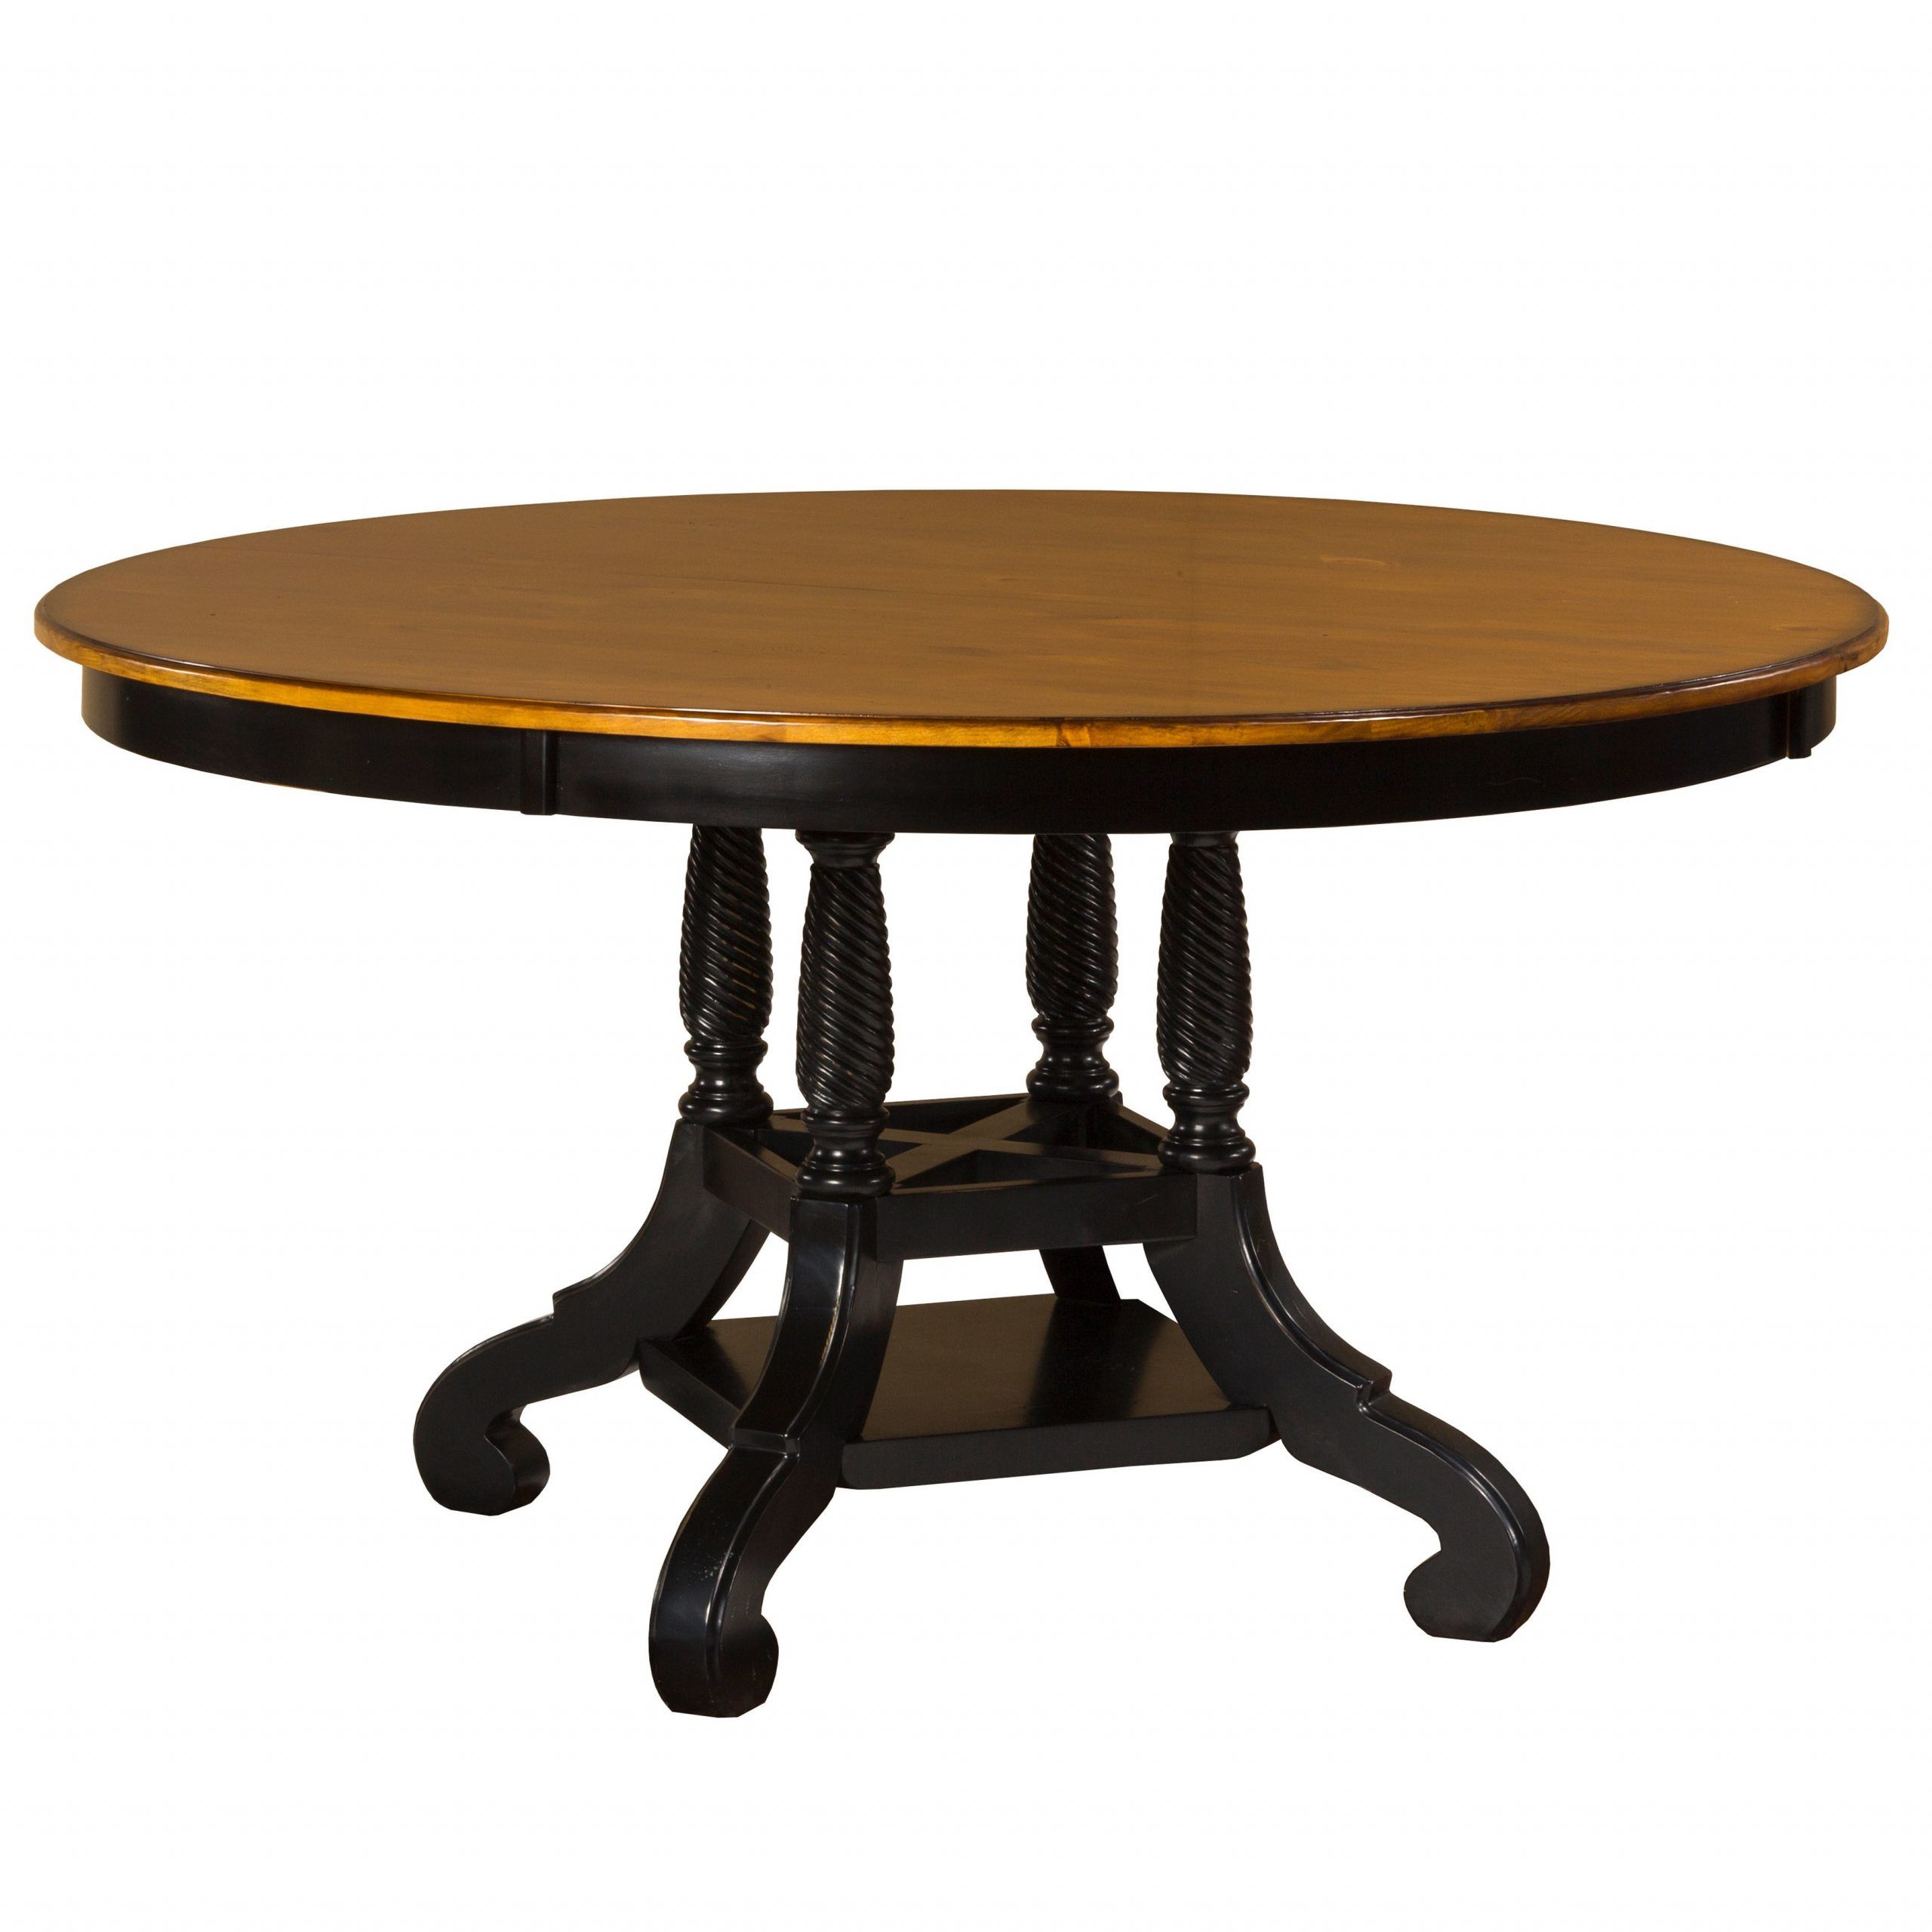 Hillsdale Furniture Wilshire Rubbed Black Wood Round Table With Best And Newest Blackened Oak Benchwright Extending Dining Tables (View 22 of 25)